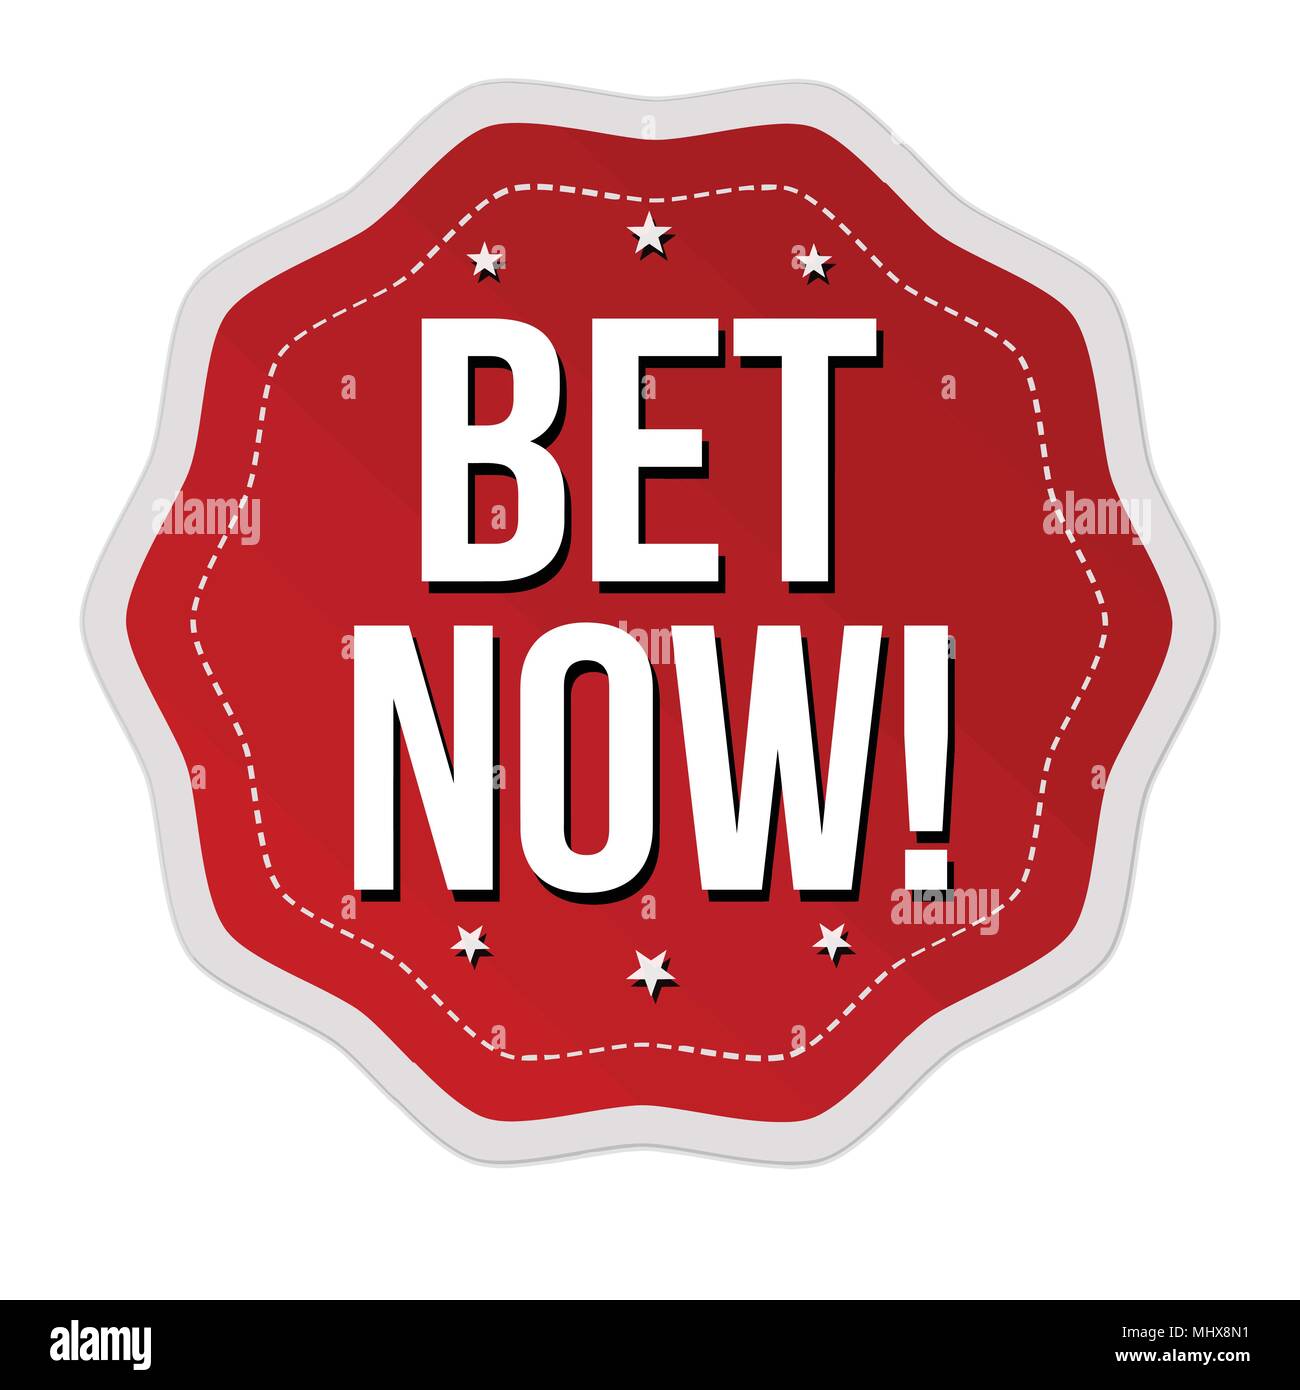 Bet now label or sticker on white background, vector illustration Stock Vector